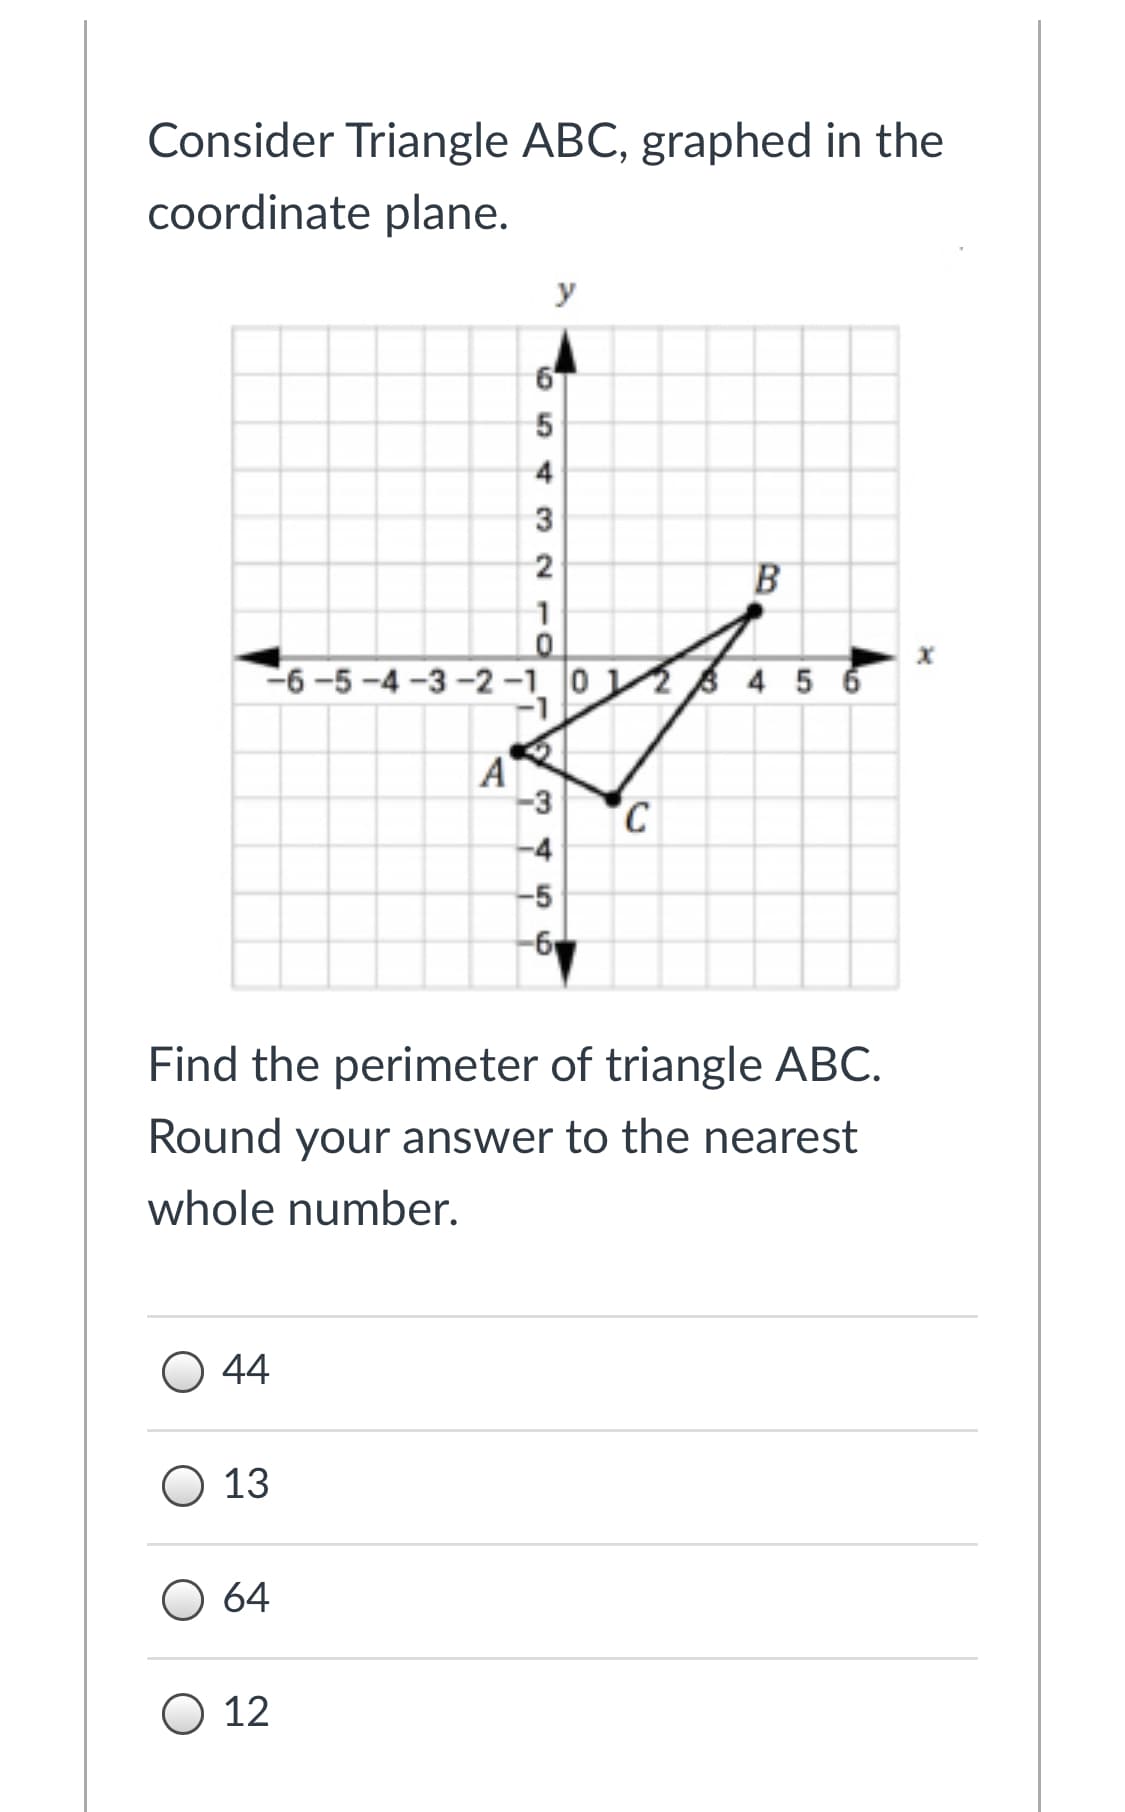 Consider Triangle ABC, graphed in the
coordinate plane.
y
2
В
-6-5 -4 -3 -2-1. 0 4 5 6
A
-3
C
-4
-5
Find the perimeter of triangle ABC.
Round your answer to the nearest
whole number.
44
О 13
O 64
O 12
4.
10
